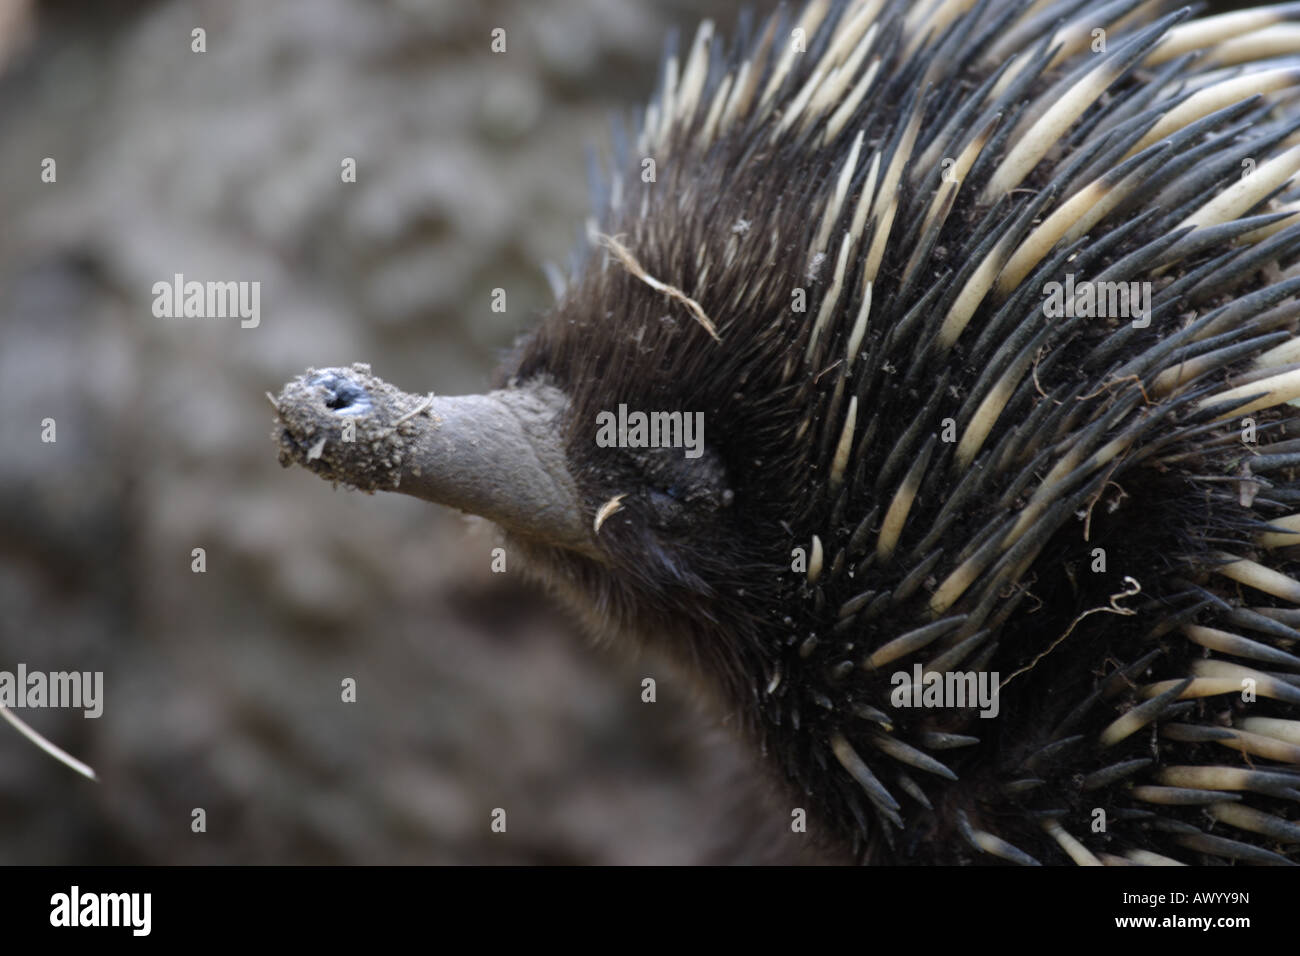 Short-nosed echidna, tachyglossus aculeatus, single adult Stock Photo